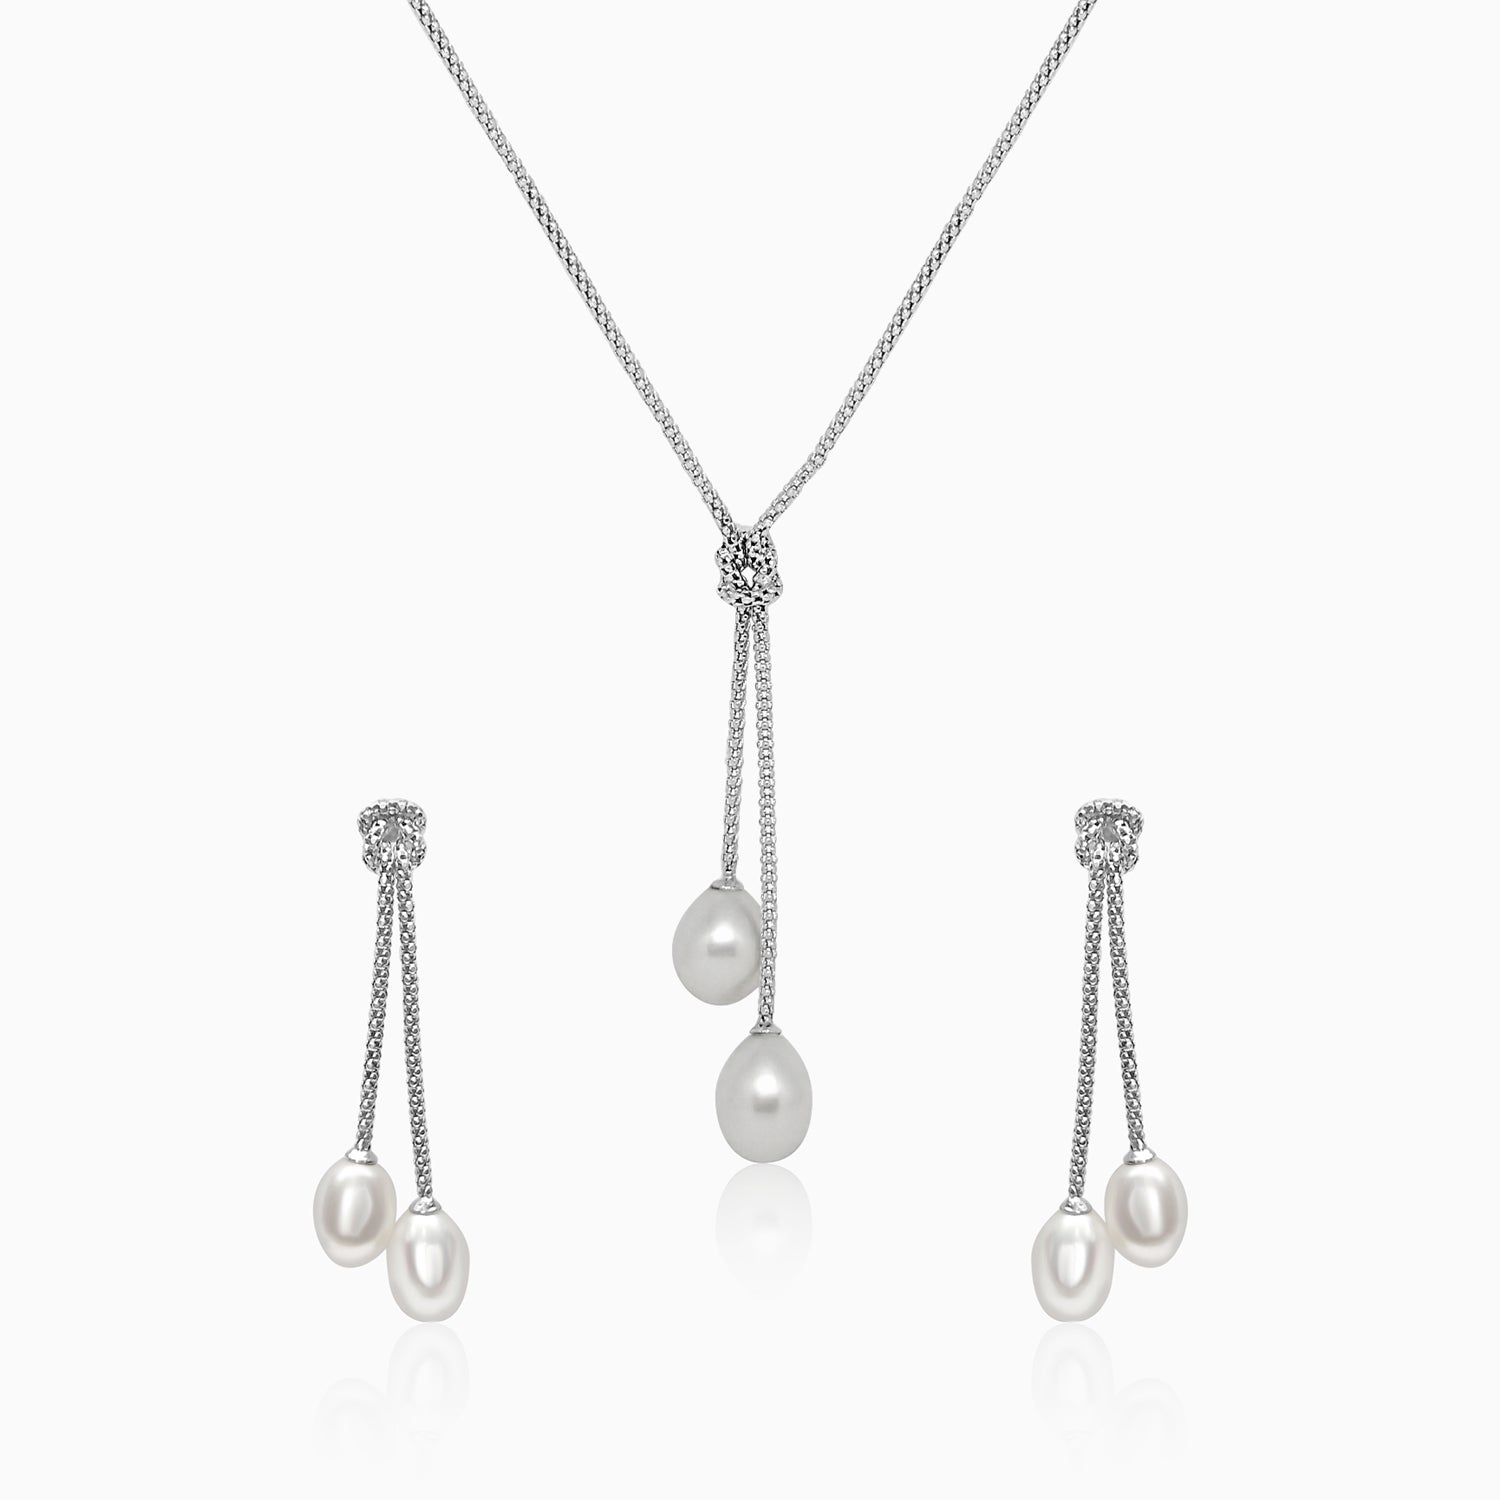 Silver Knotted Dangling Pearls Pendant Set